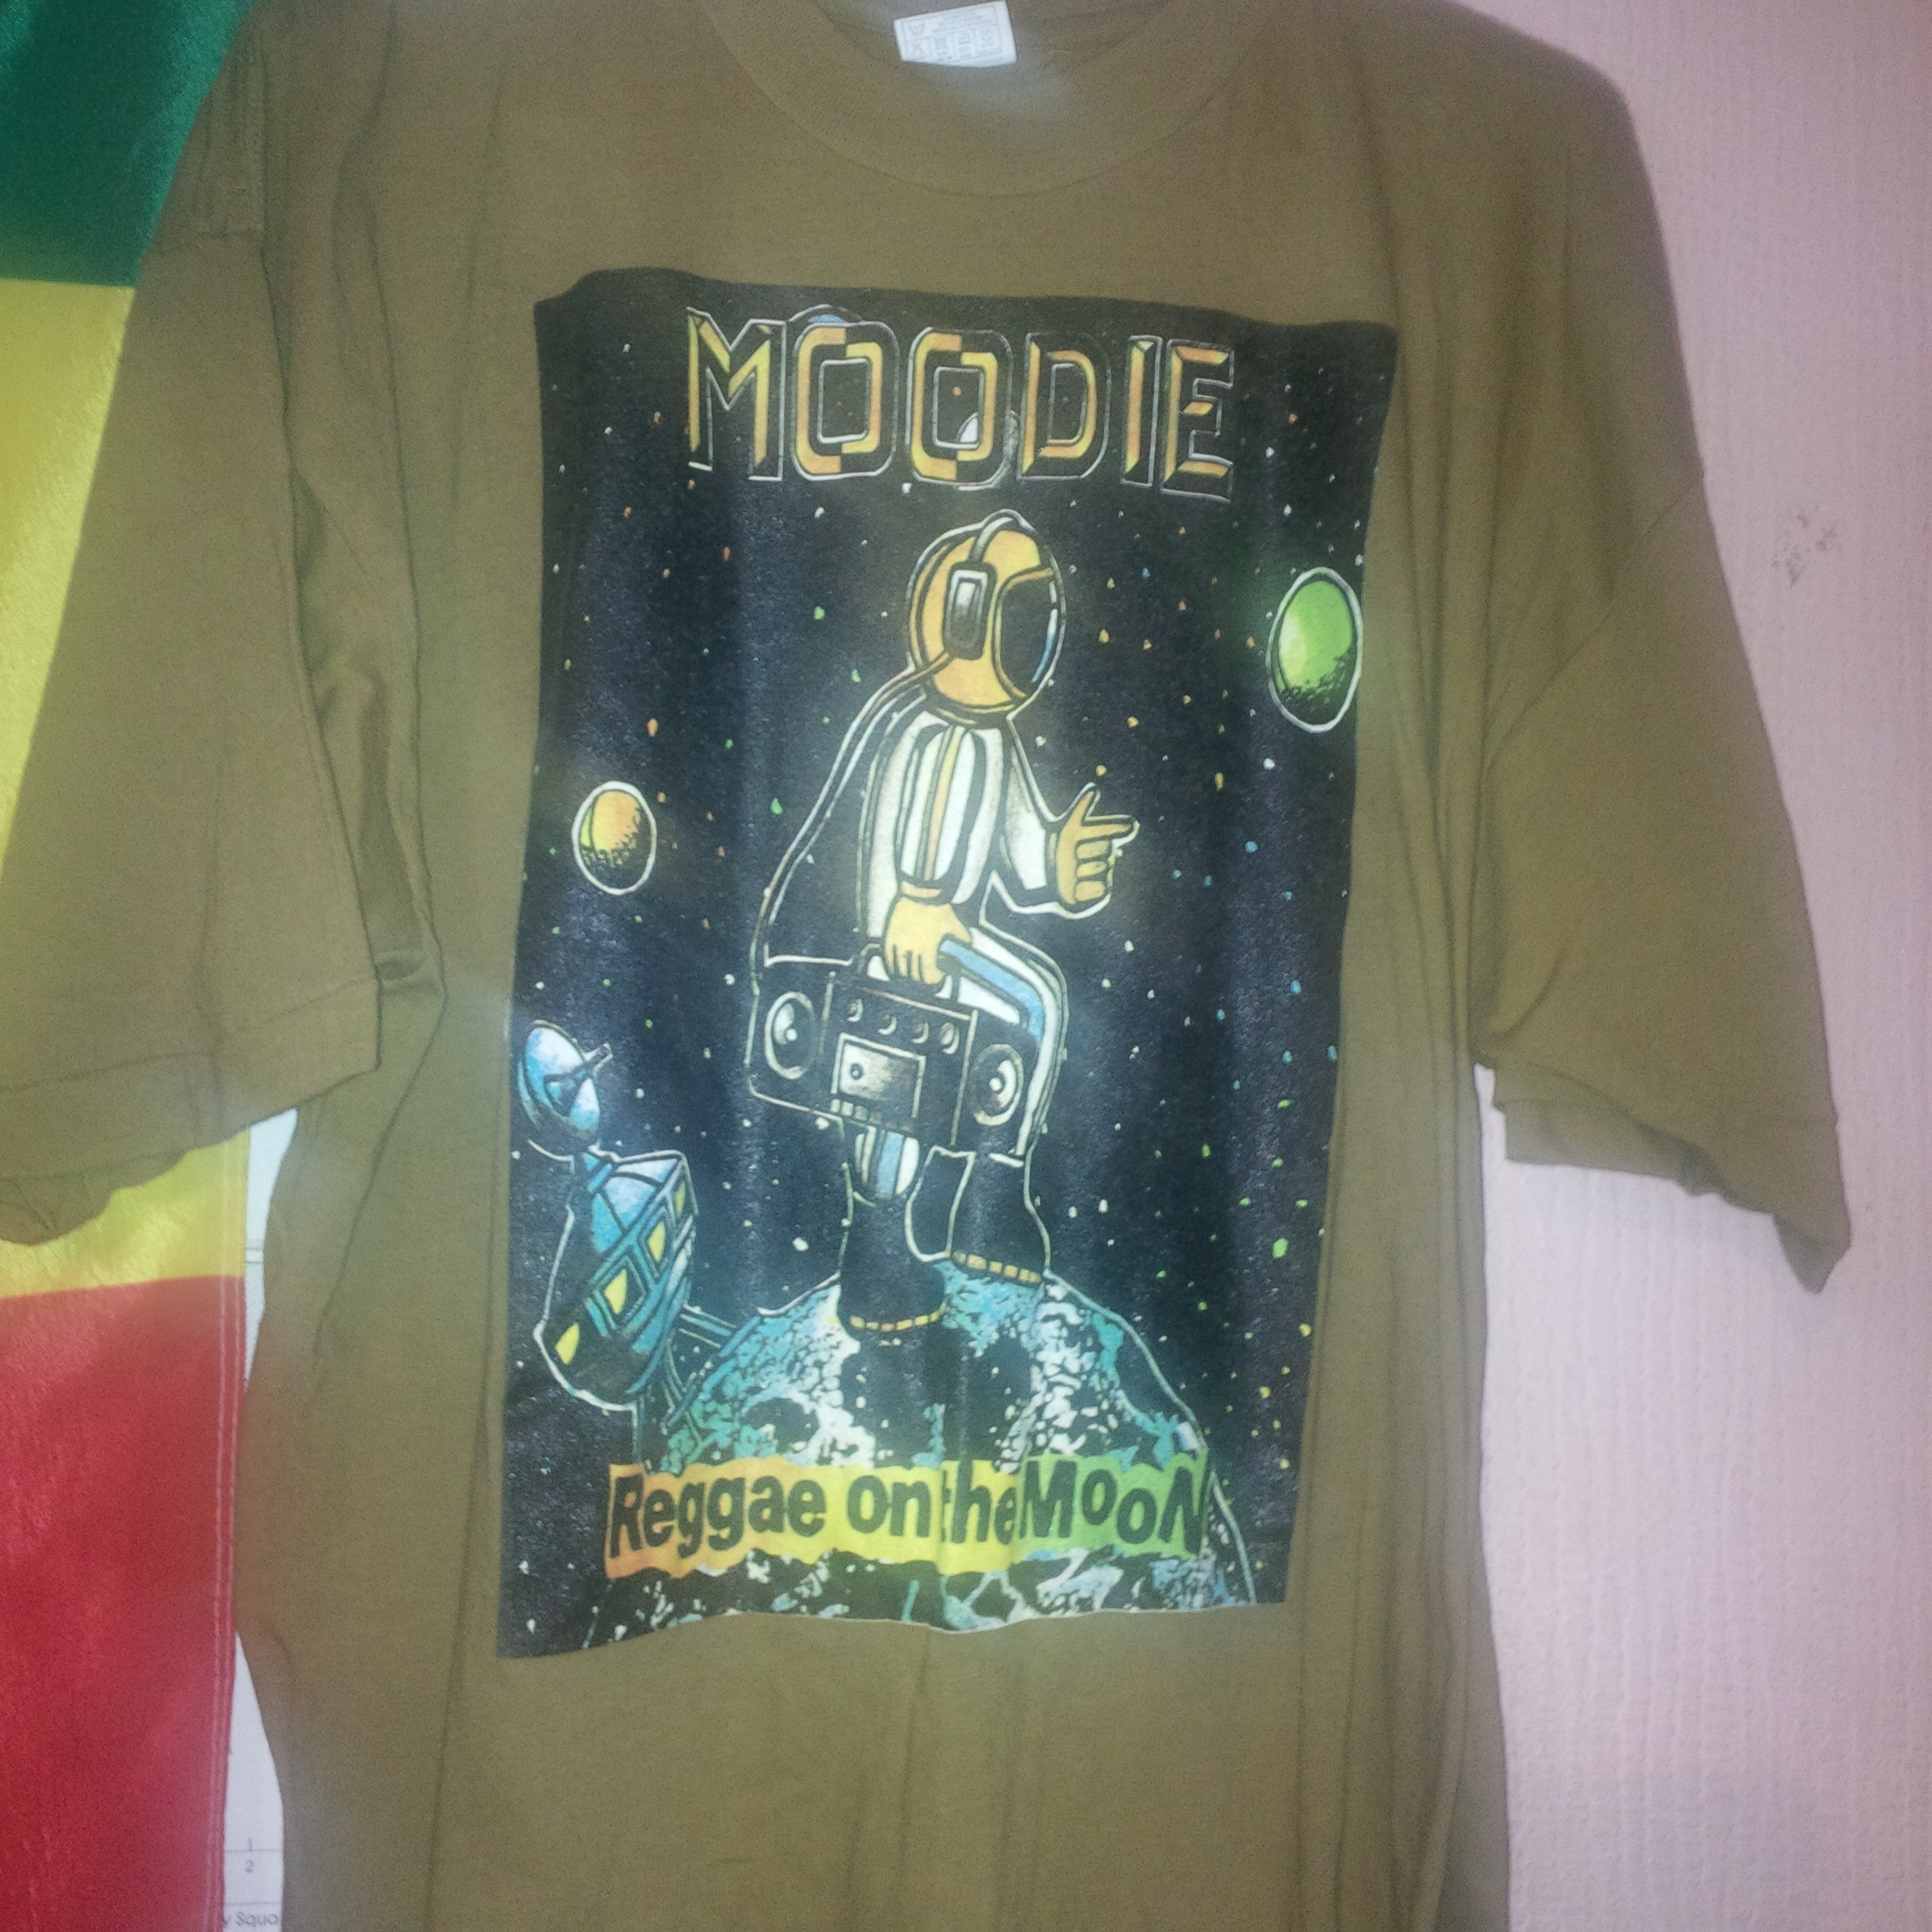 Reggae On The Moon Tee Shirt Moodie Music - target roblox gift card roseville robux codes 2019 not expired mobile